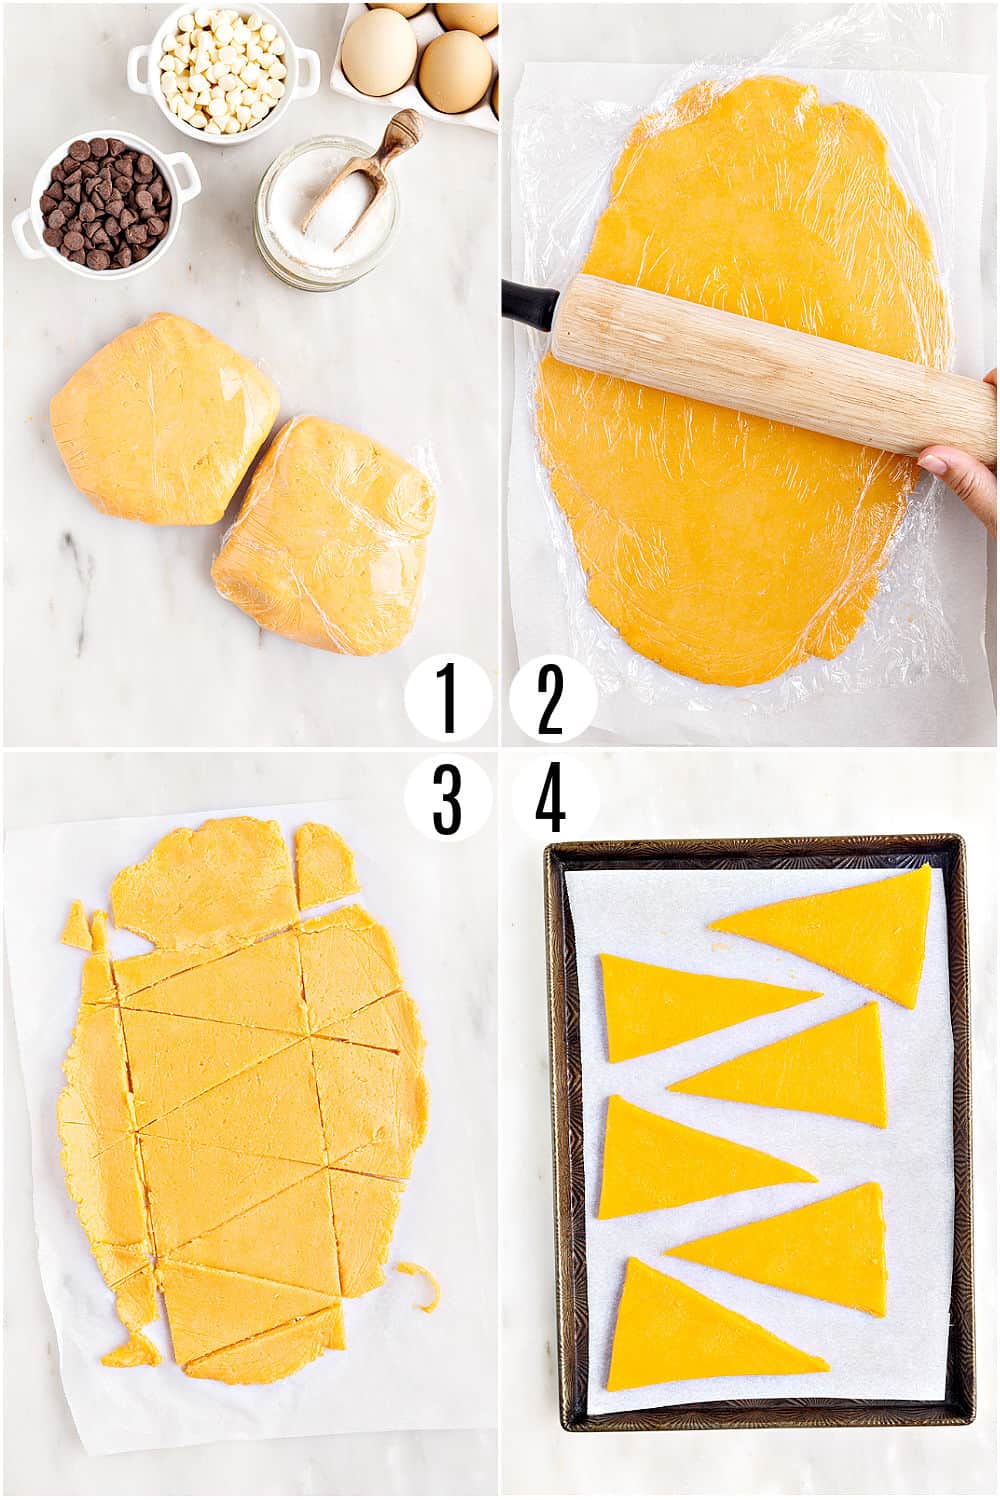 Step by step directions showing how to make sugar cookie dough.